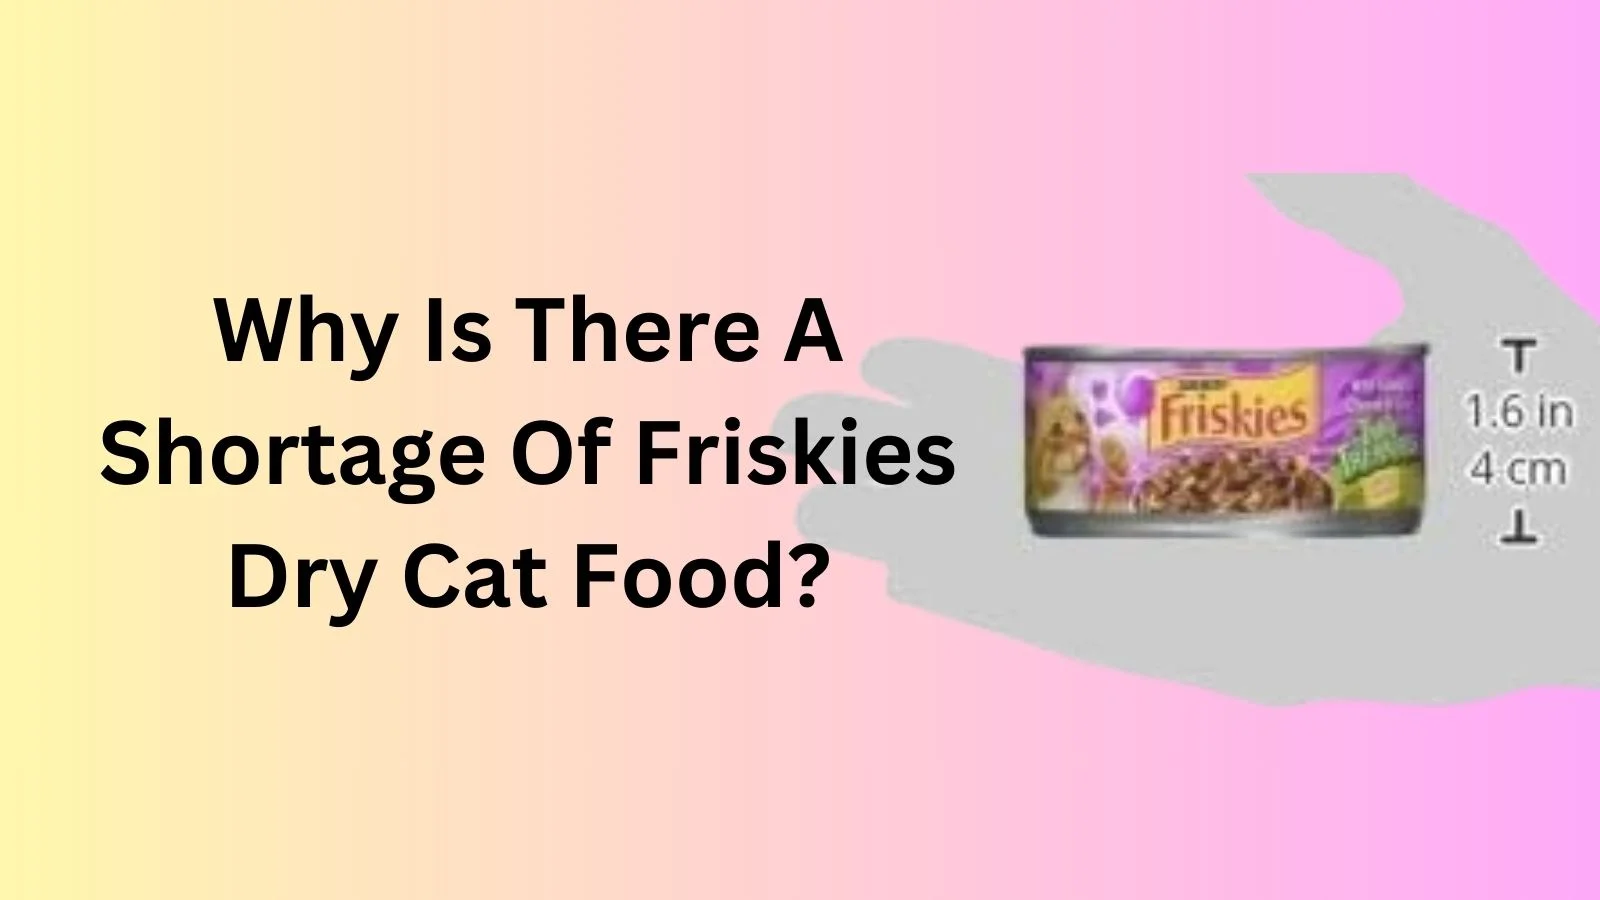 Why Is There A Shortage Of Friskies Dry Cat Food